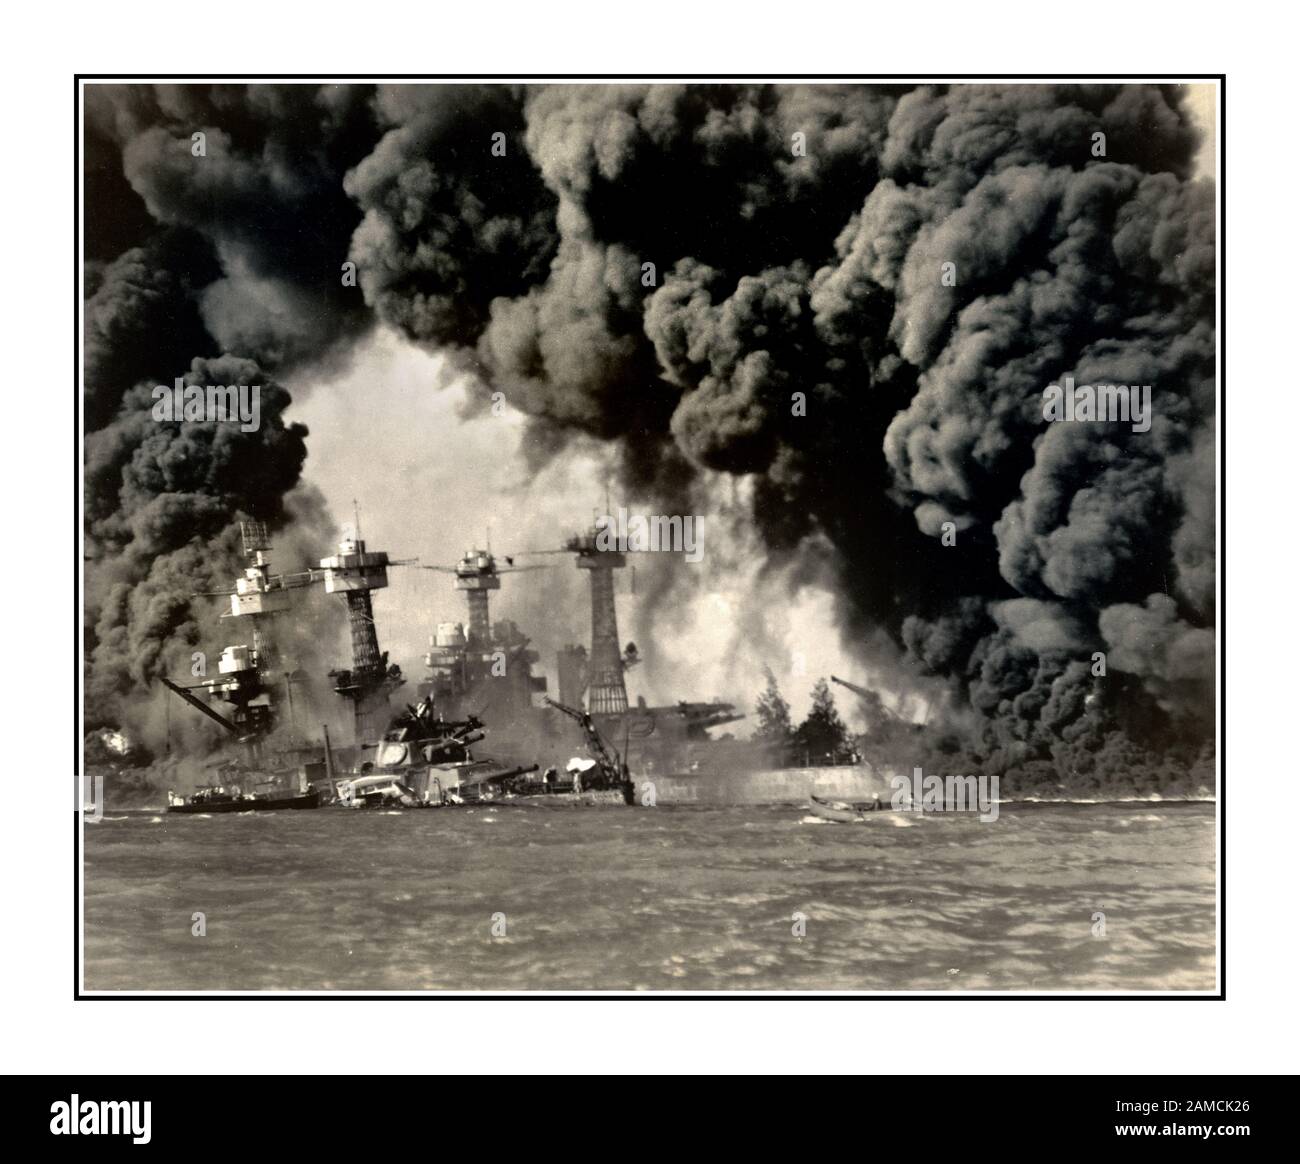 WW2 Pearl Harbor attack 7th December 1941 Japanese surprise air raid on US Navy. U.S.S. West Virginia, U.S.S. Tennessee, U.S.S. Arizona, attacked and terminally damaged Hawaii Japanese attack Pearl Harbor US Navy World War II Naval Operating Base, Pearl Harbor, Oahu, Hawaii USA, Stock Photo